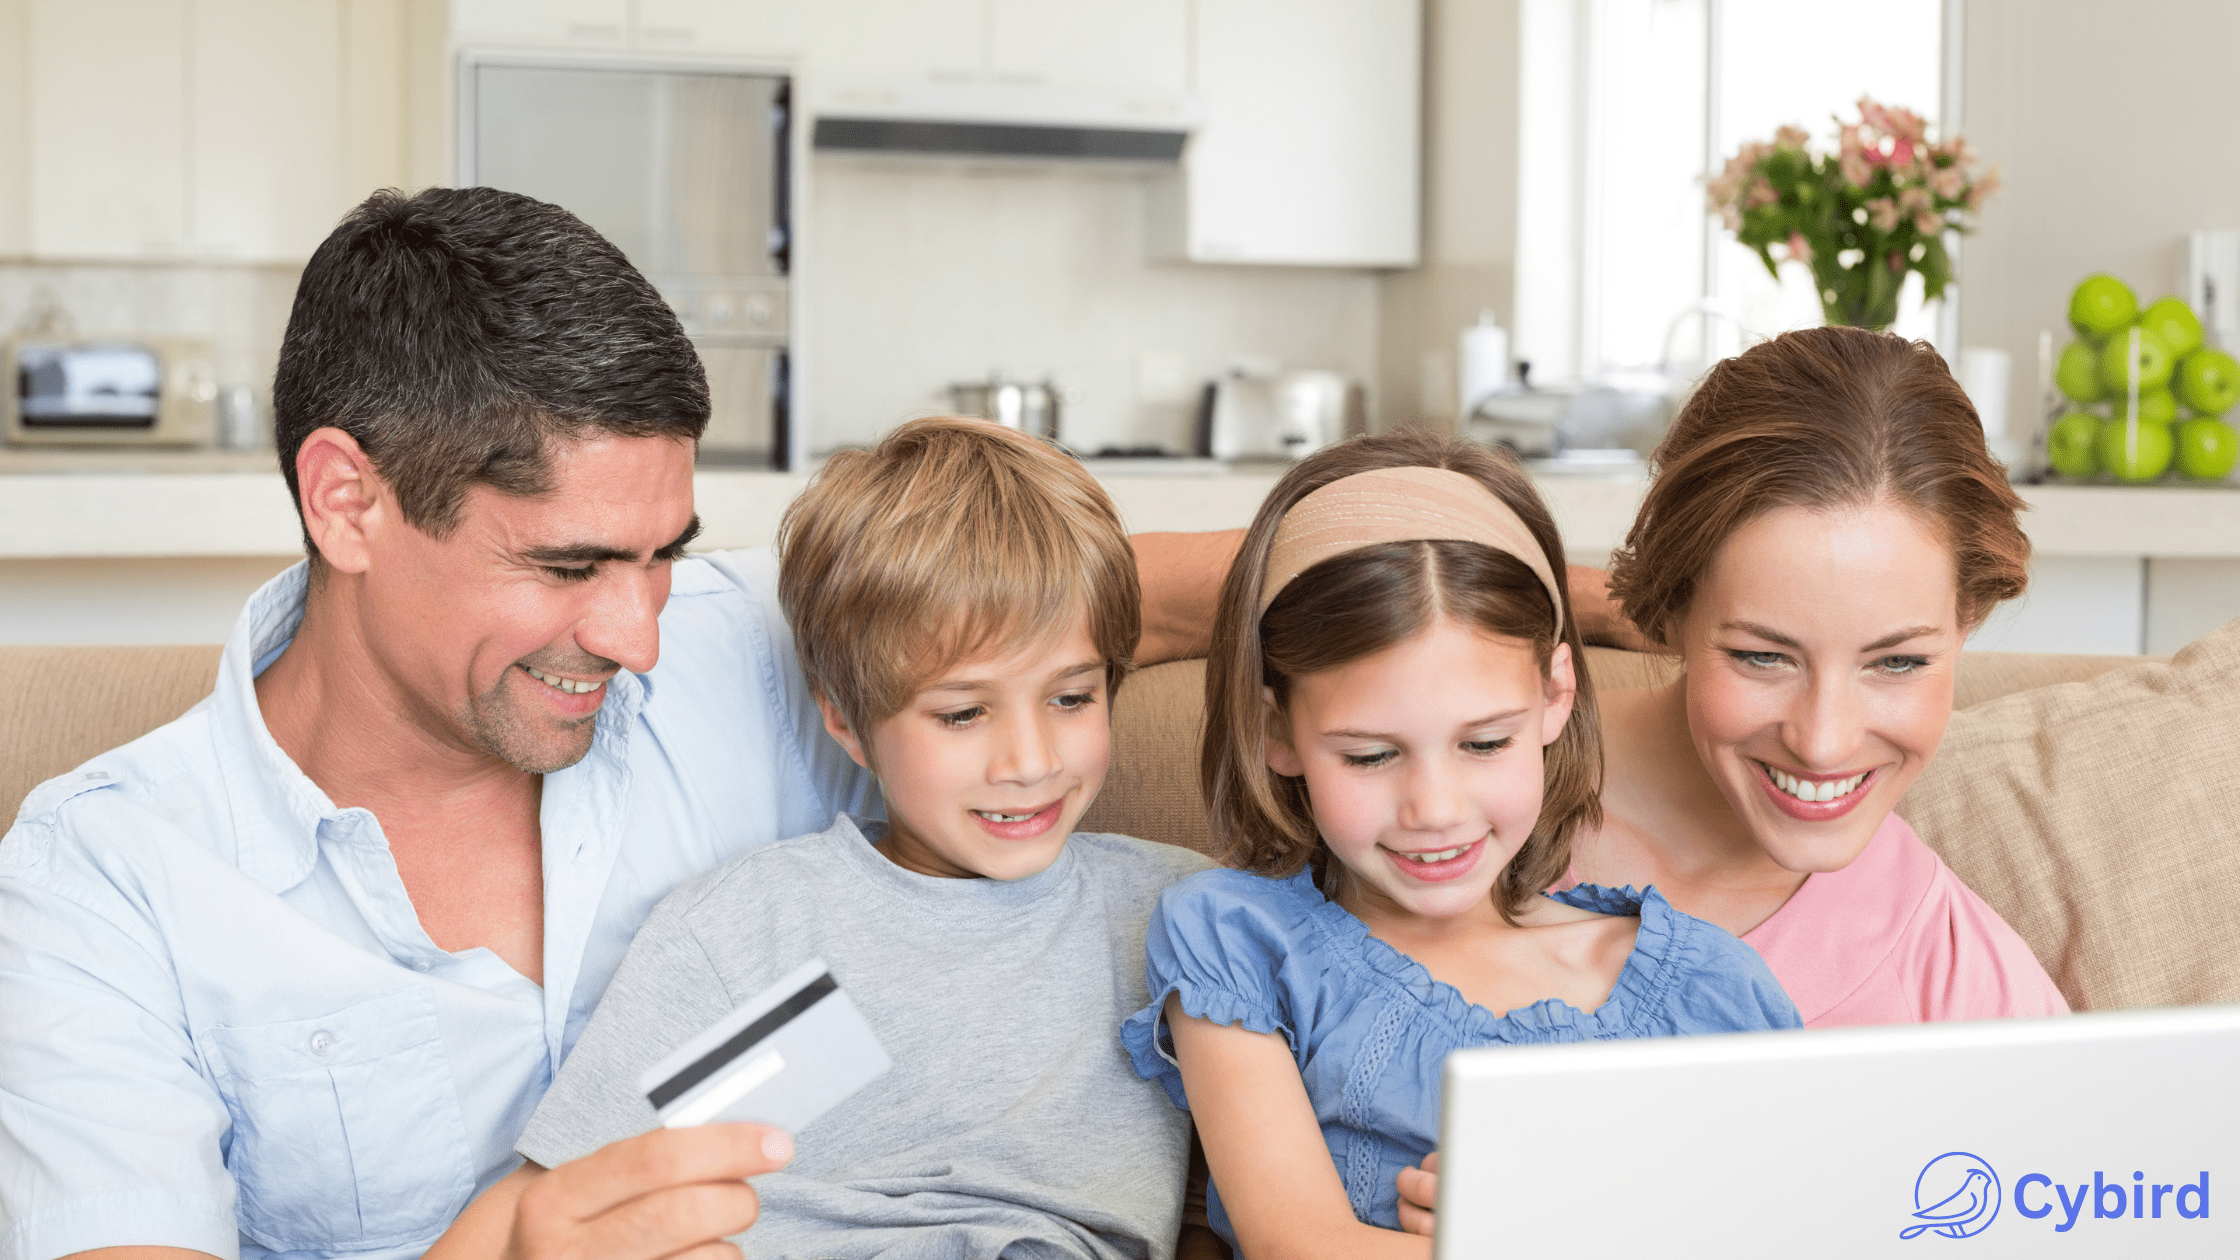 Protecting Our Loved Ones: A Guide to Safe Internet Use for Families